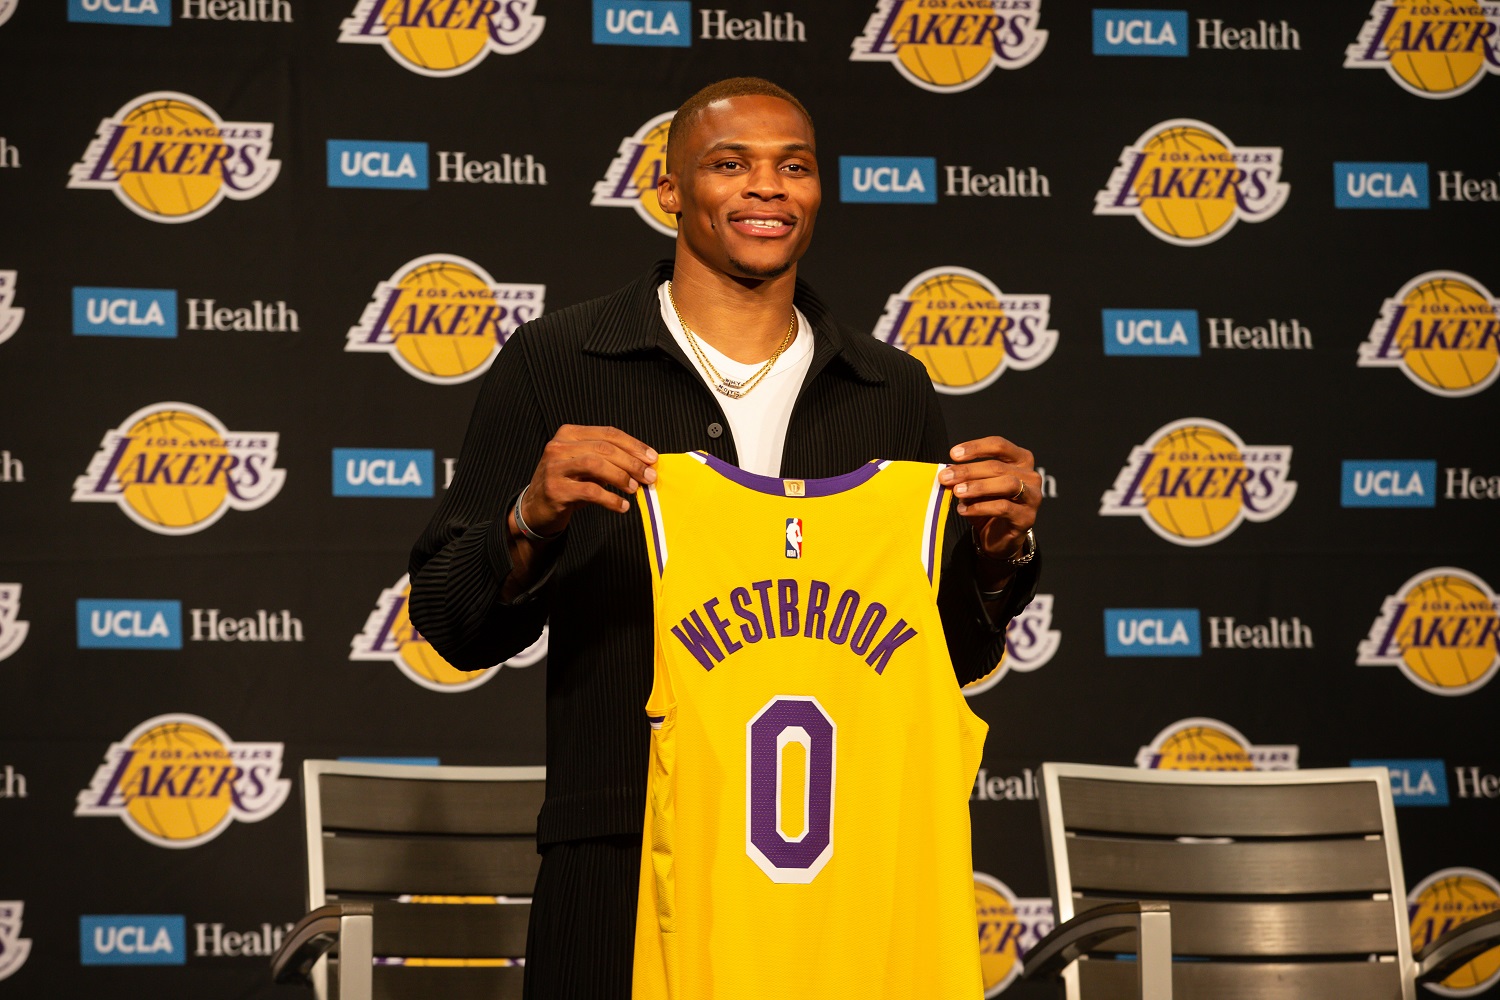 Russell Westbrook poses with his jersey during the Los Angeles Lakers' Introductory news conference for Russell Westbrook on Aug. 10, 2021.